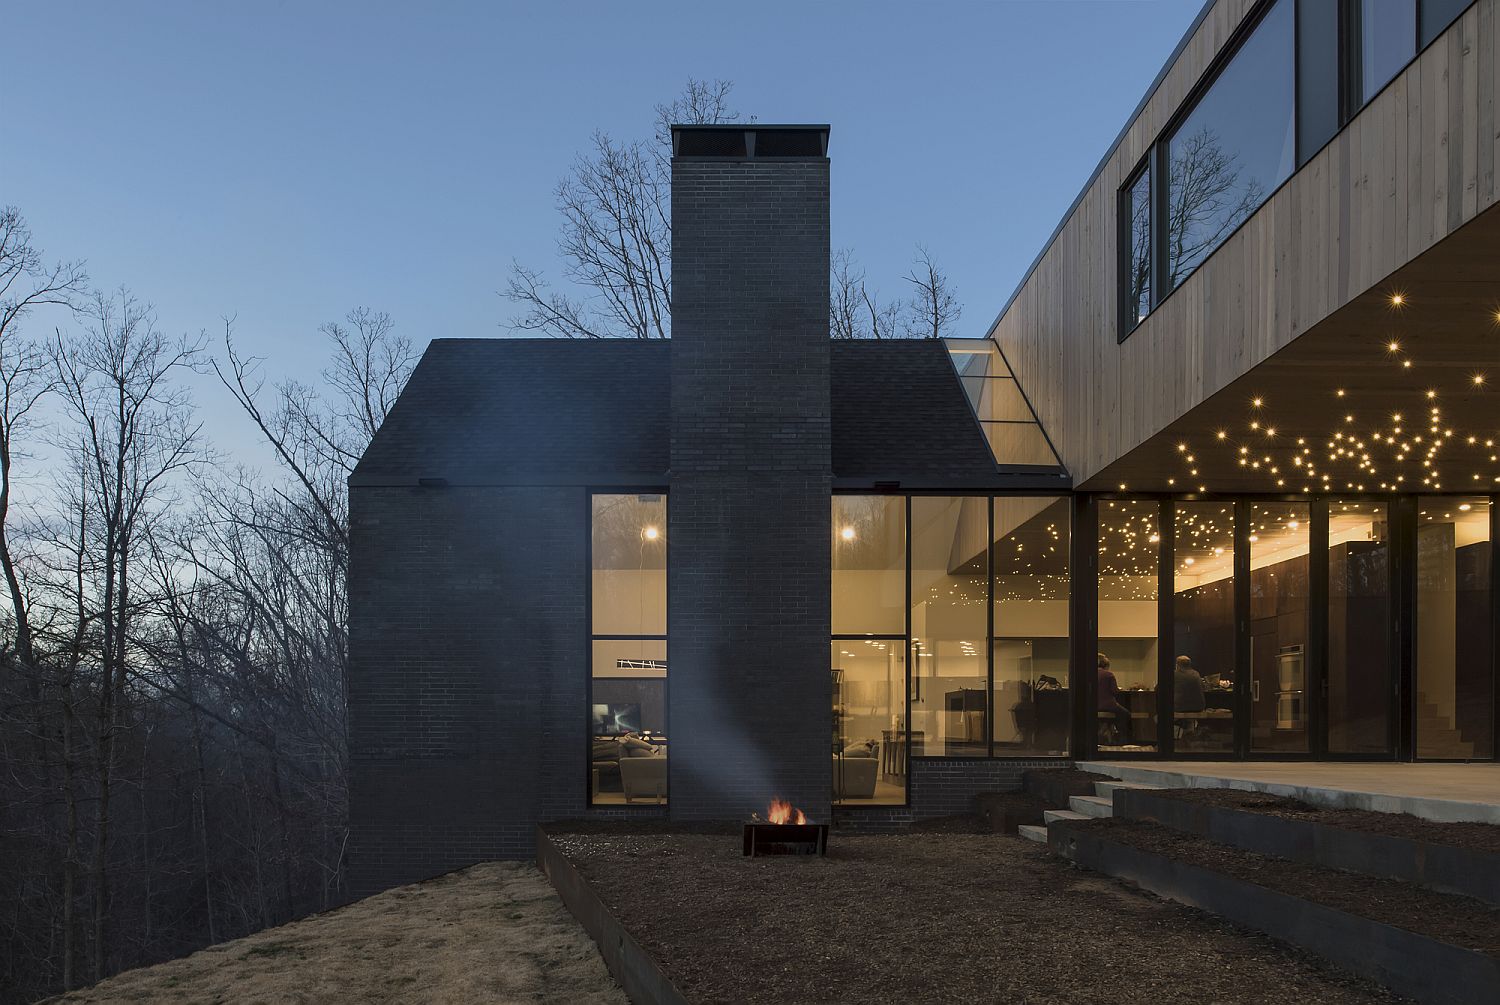 Dogwoodtrot House: Sparkling and Woodsy Modern Twist to the Vernacular